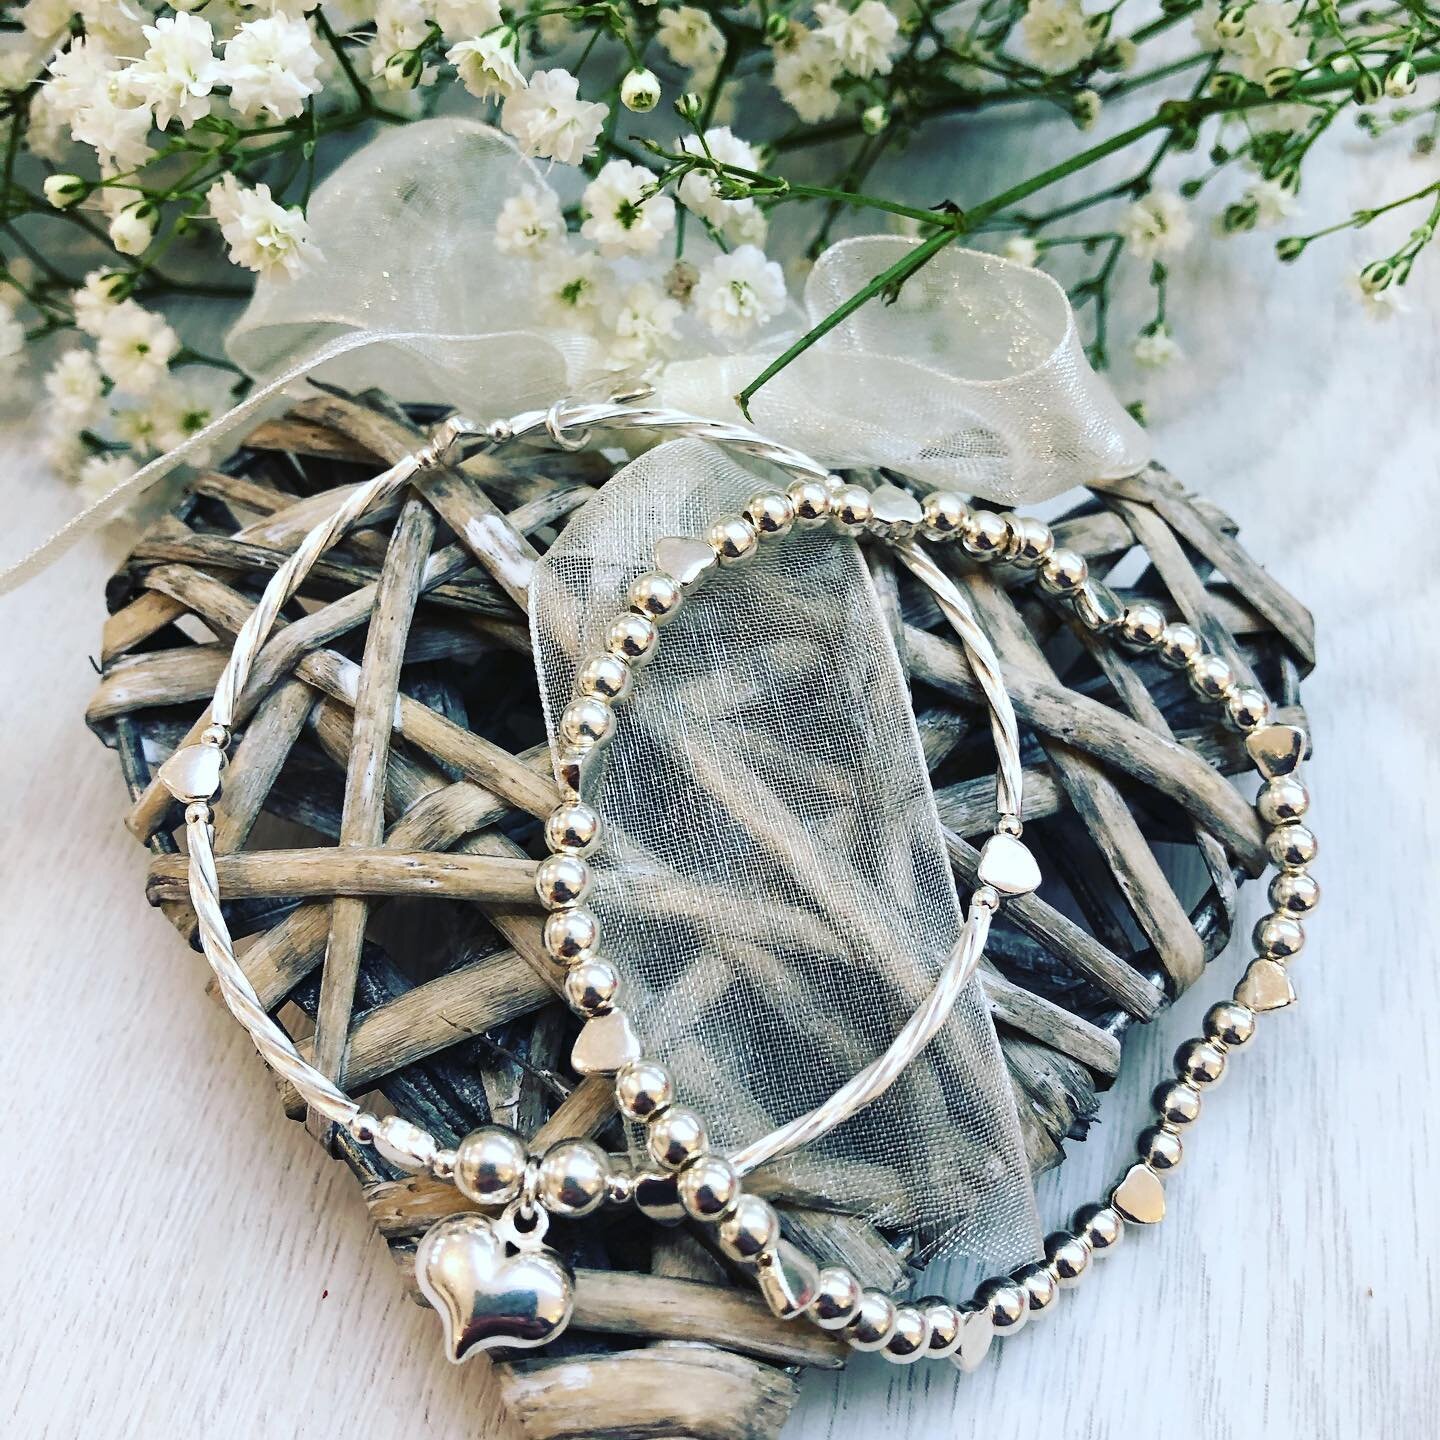 Less than a week until Valentine&rsquo;s Day. There is 10% off all bracelets this week (finishing on Valentine&rsquo;s Day) if you fancy treating yourself or a loved one. X